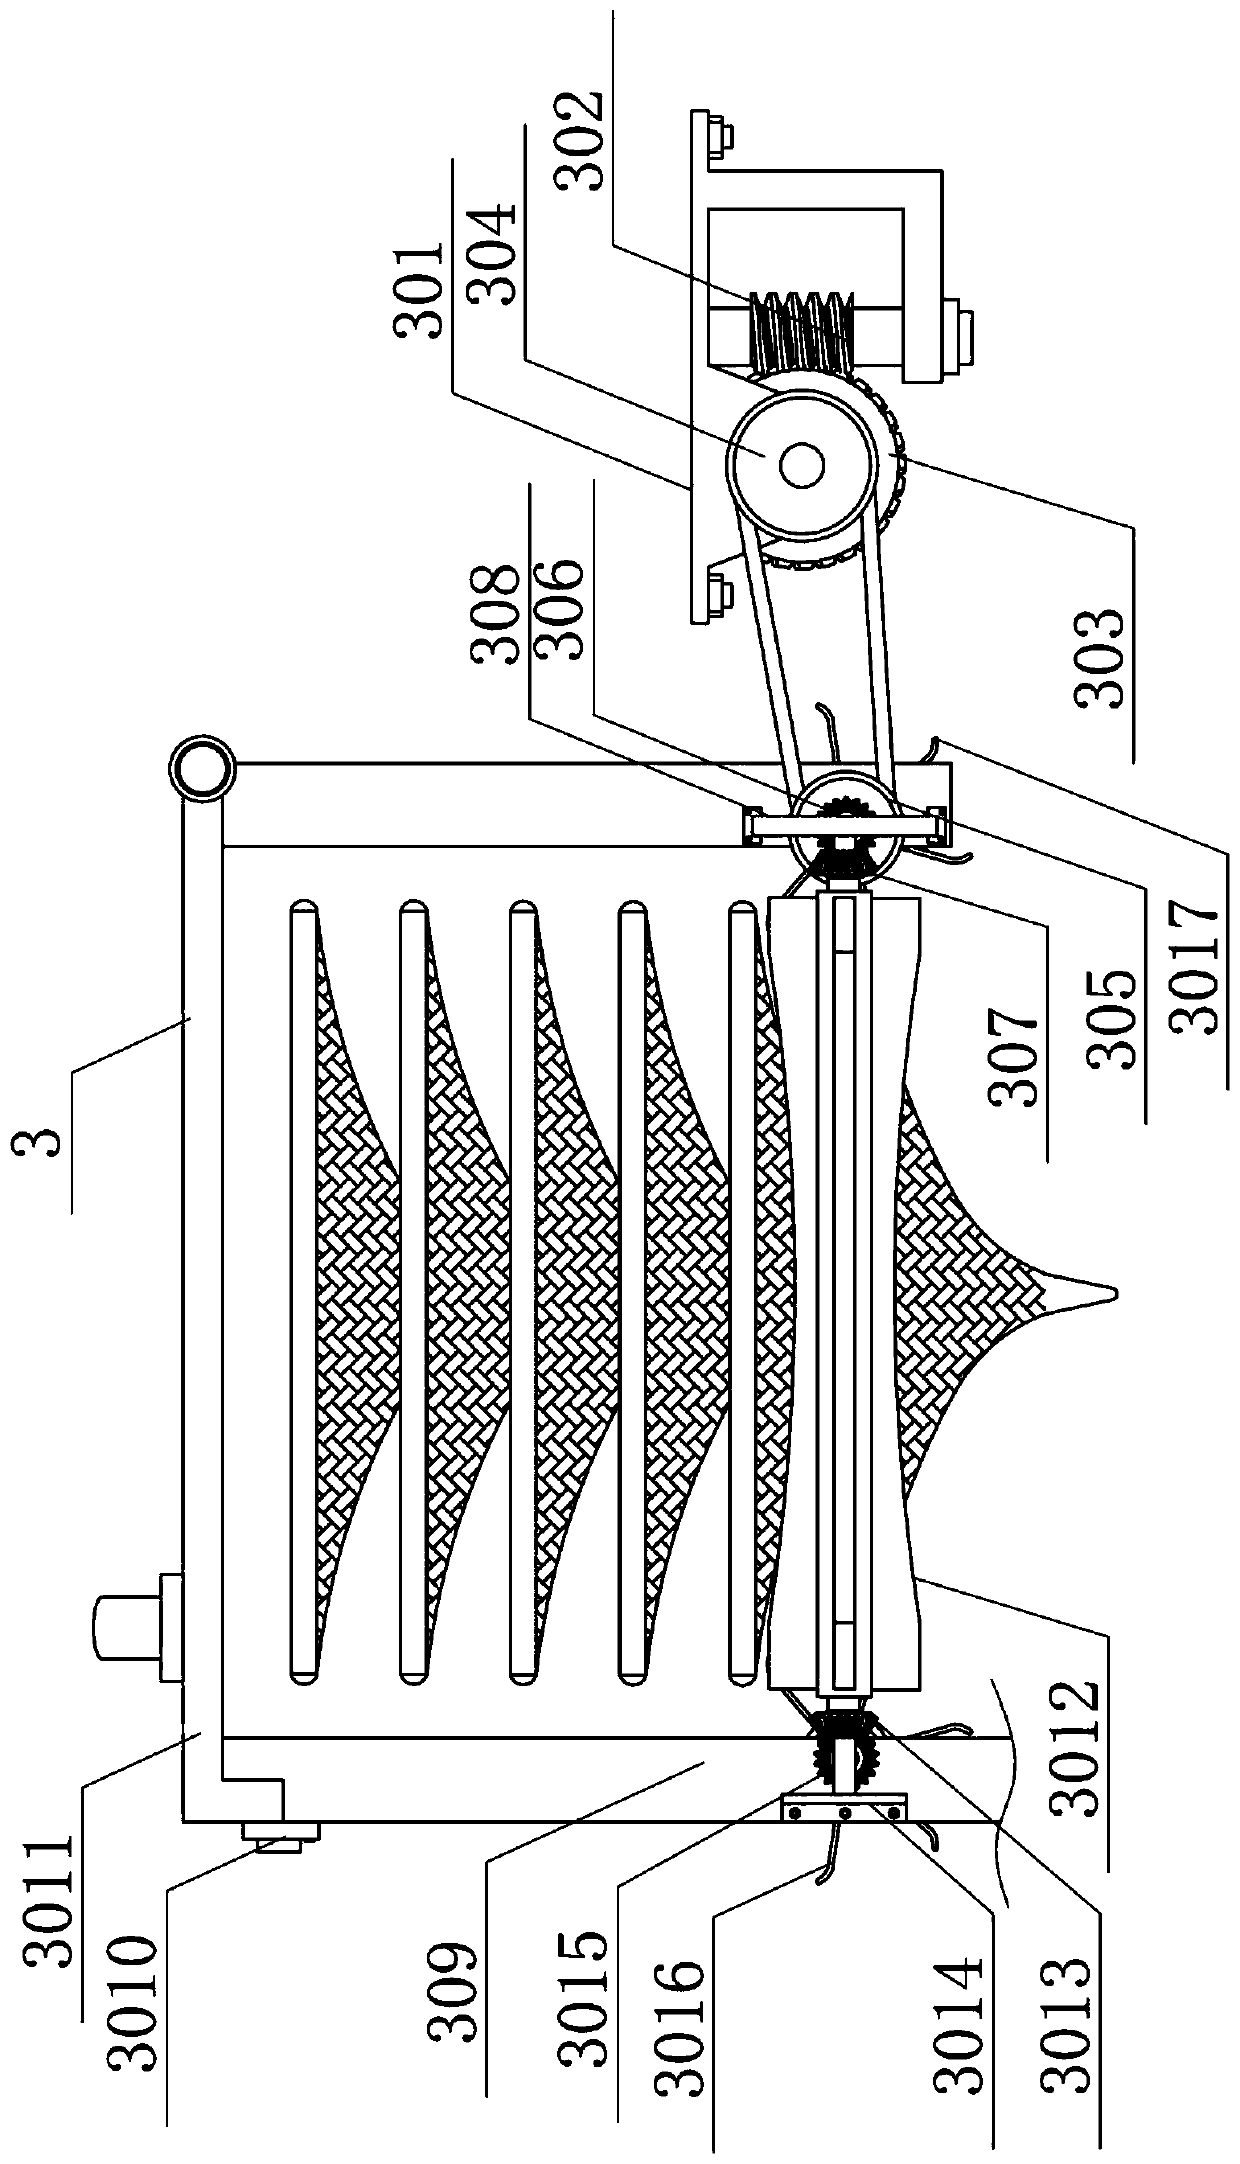 Bamboo product production device